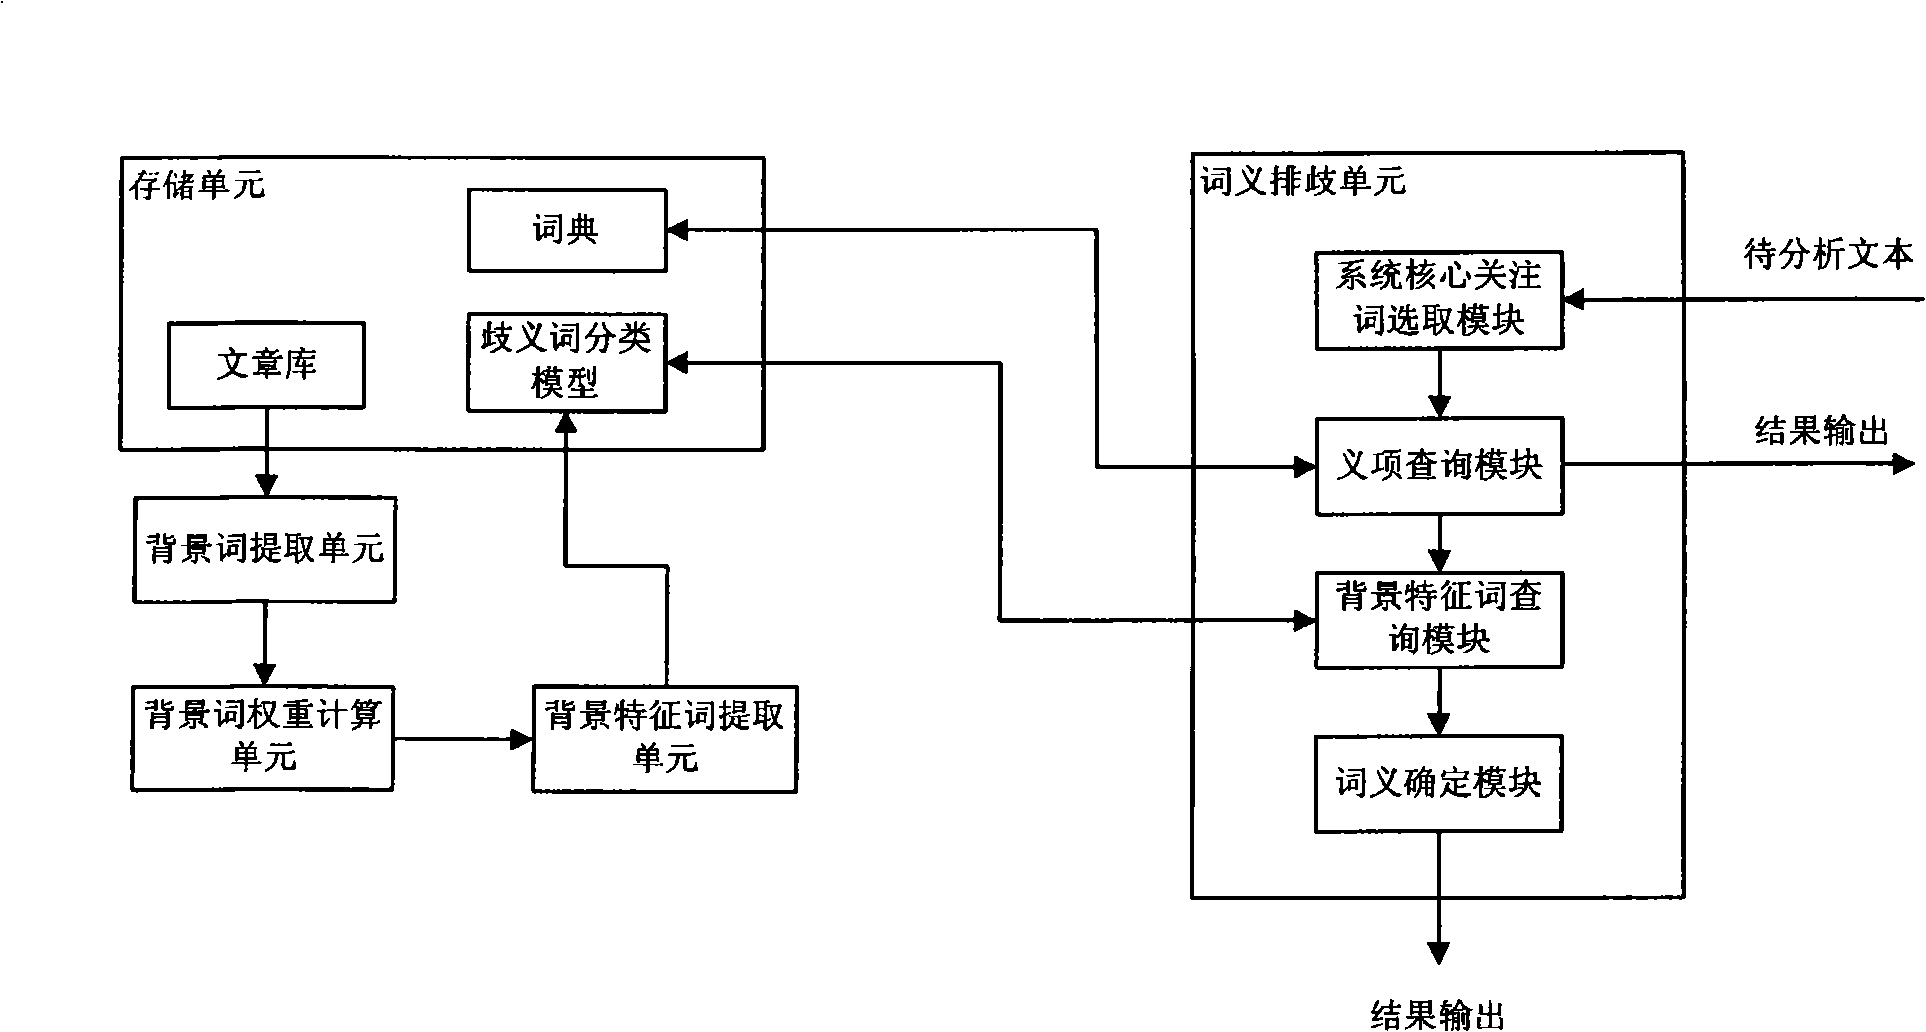 Method and system for eliminating ambiguity for word meaning by computer, and search method